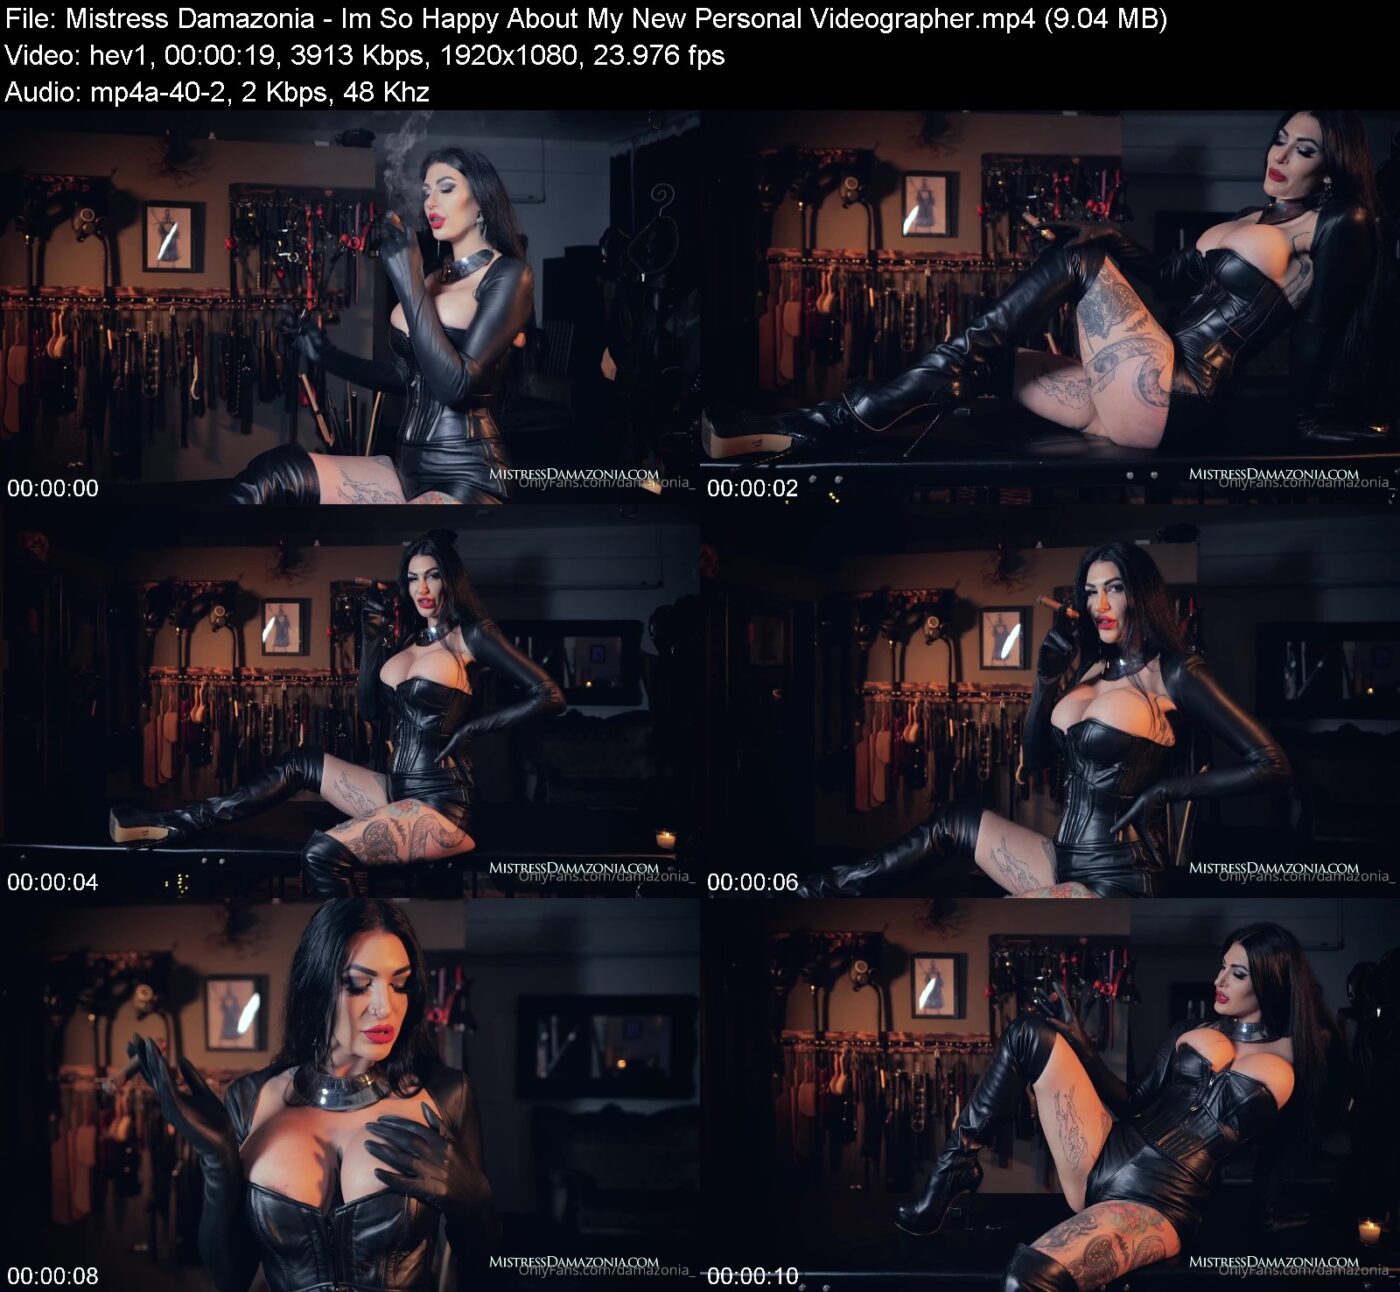 Actress: Mistress Damazonia. Title and Studio: Im So Happy About My New Personal Videographer